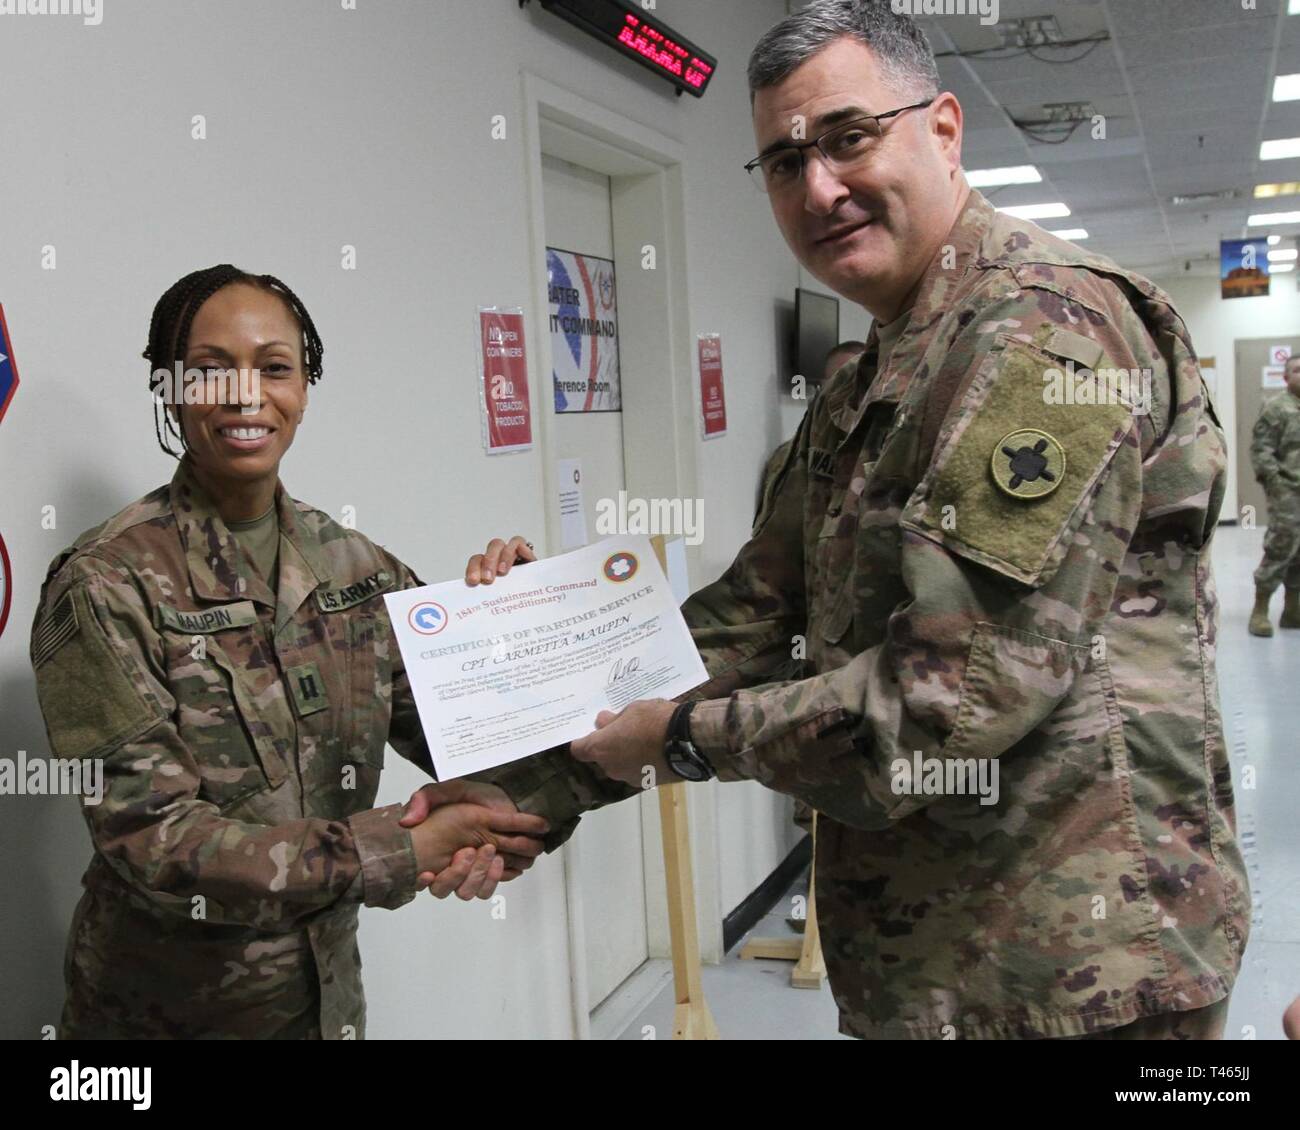 Brig. Gen. Clint E. Walker, commanding general of the 184th Sustainment Command, presents a certificate of wartime service to Cpt. carmetta Maupin following the placement of the 184th ESC patch on his right shoulder at Camp Arifjan, Kuwait, Mar. 3, 2019. Stock Photo